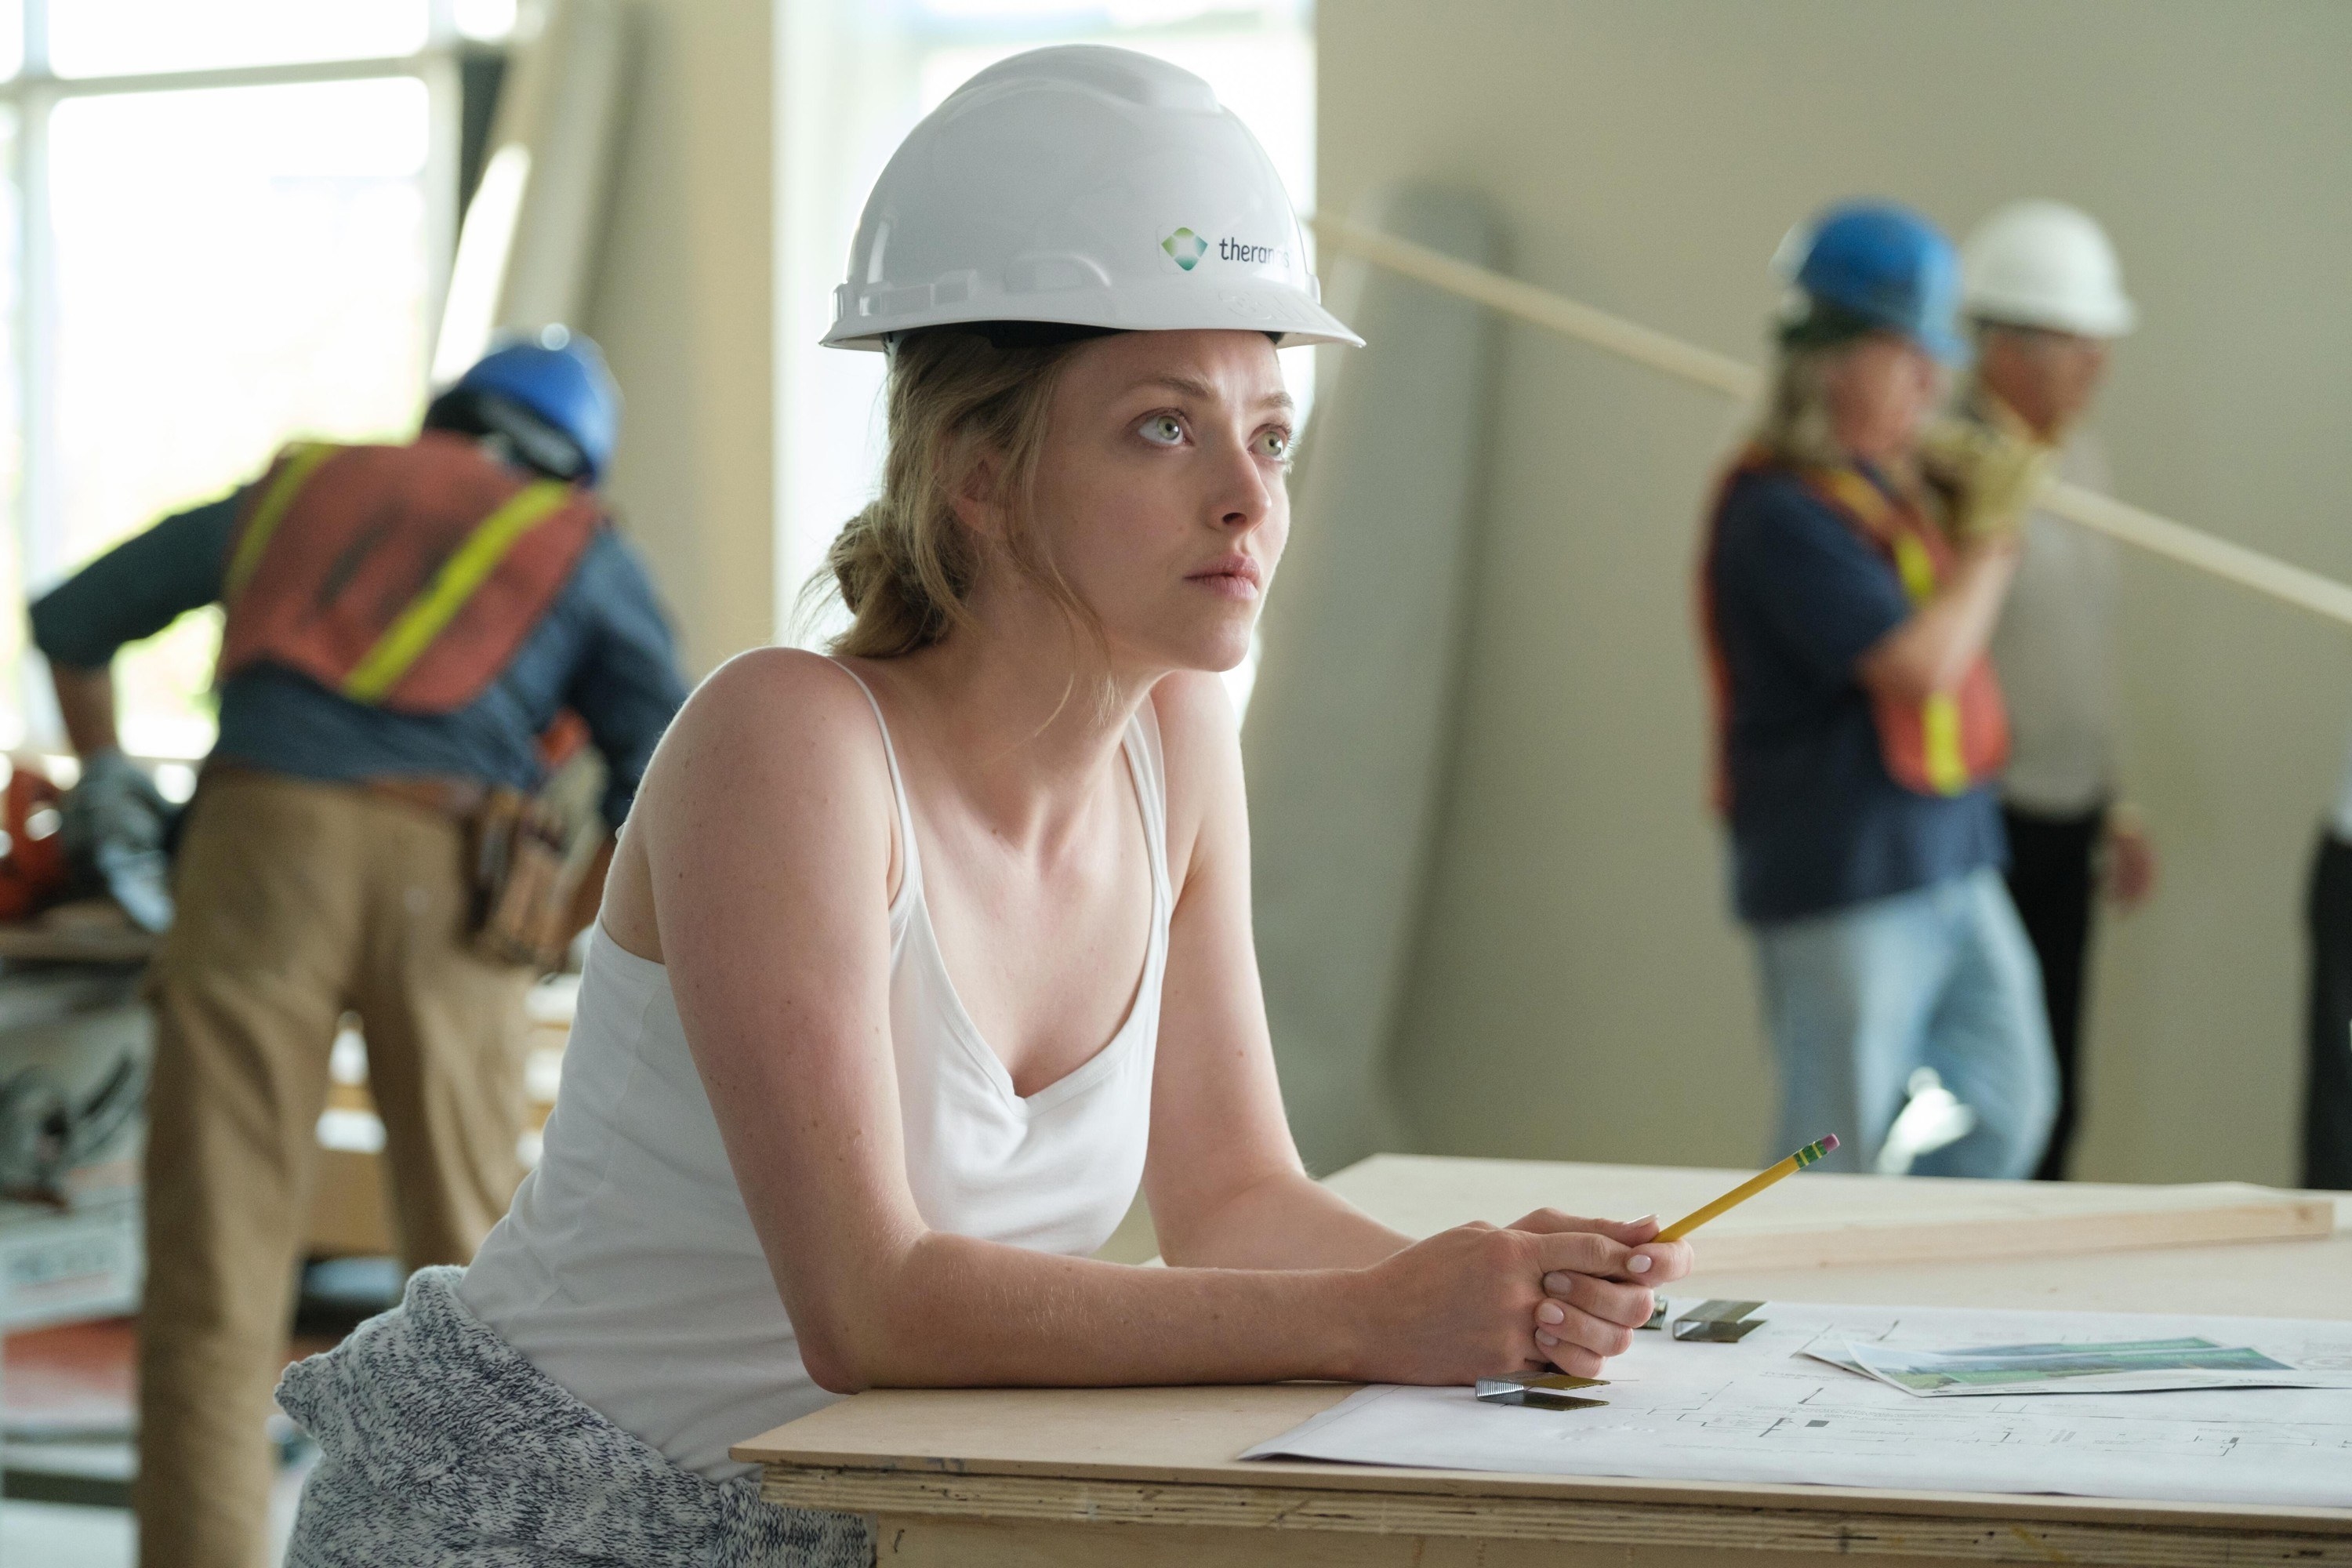 Seyfried looks up while wearing a hard hat